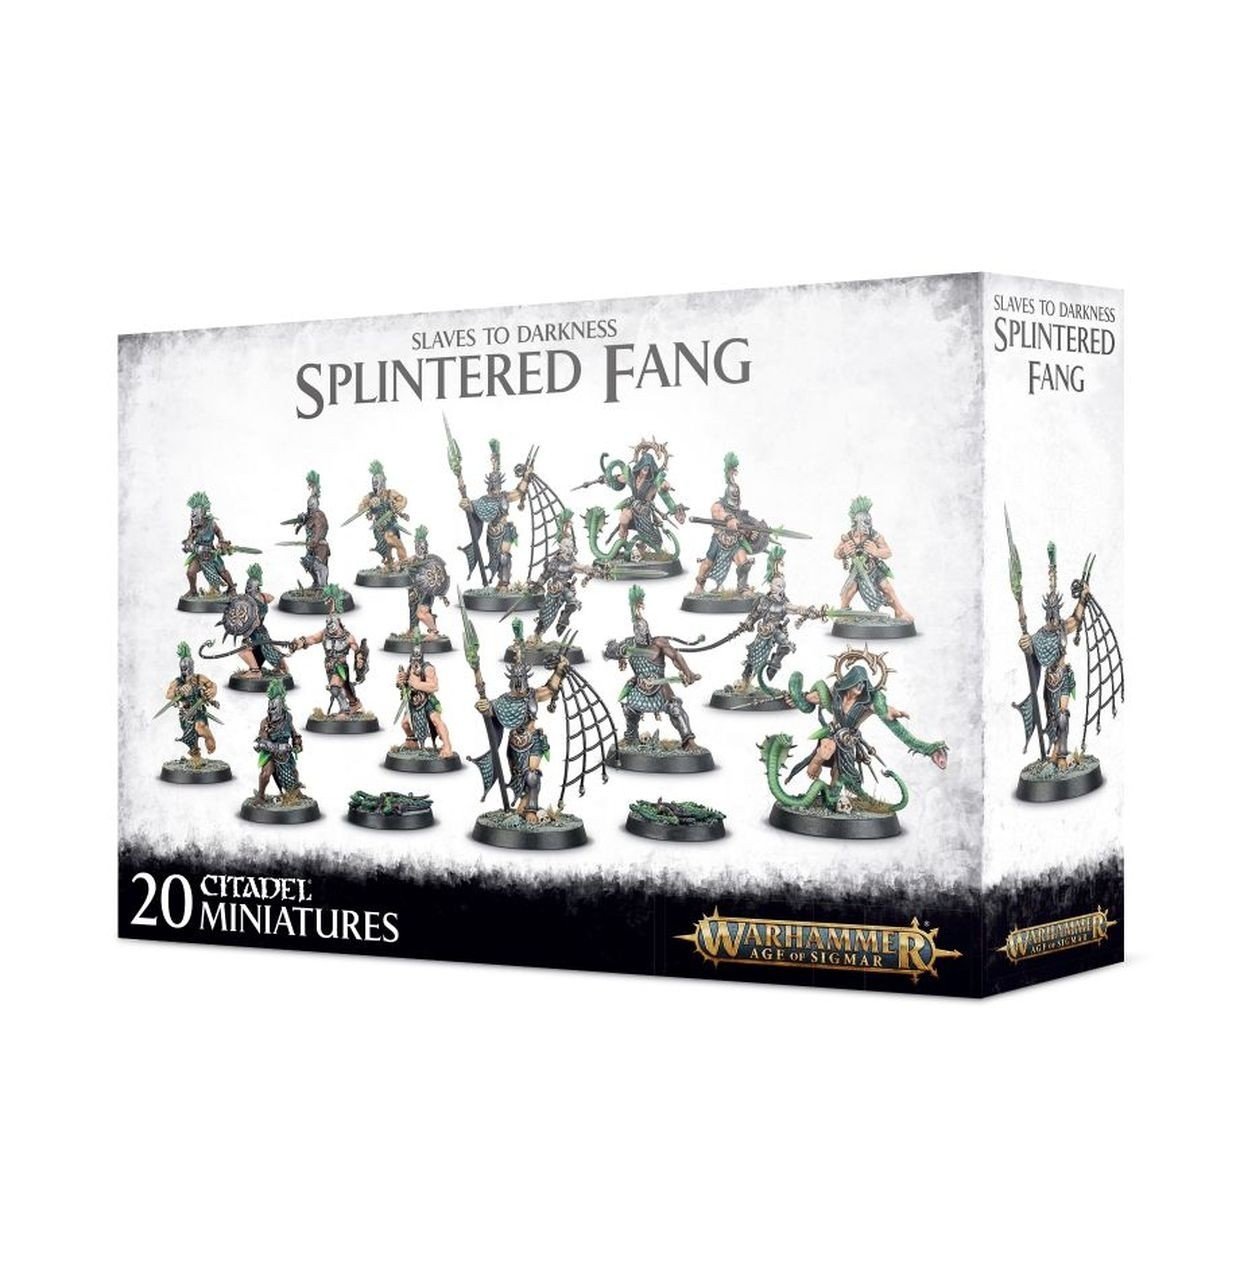 THE SPLINTERED FANG: SLAVES TO DARKNESS - WARHAMMER AGE OF SIGMAR - Good Games